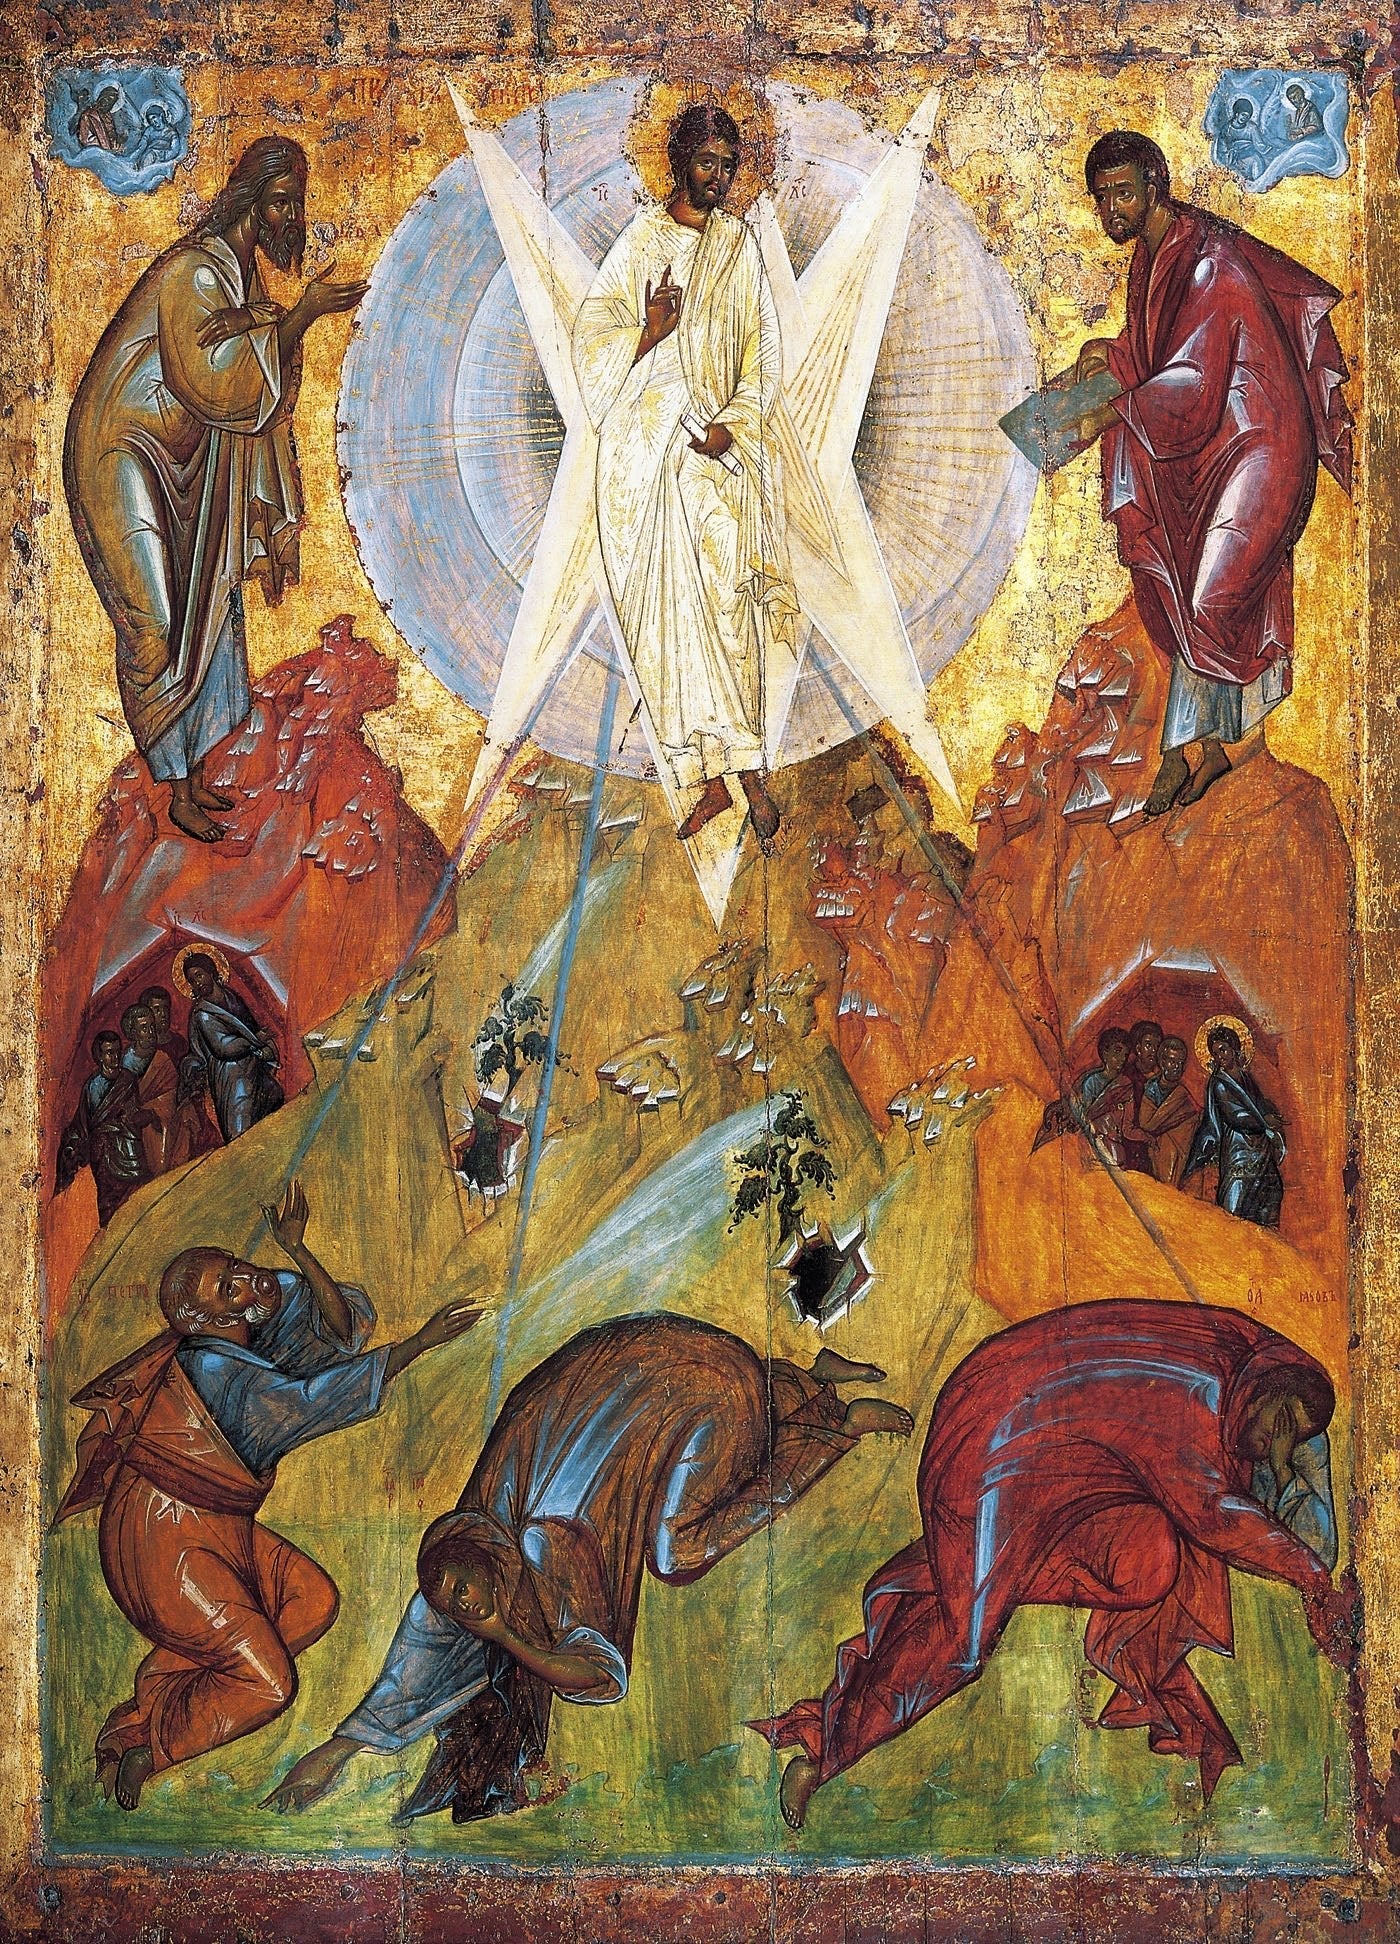 Beholding the Glory of God - A Sermon for Transfiguration (2020)